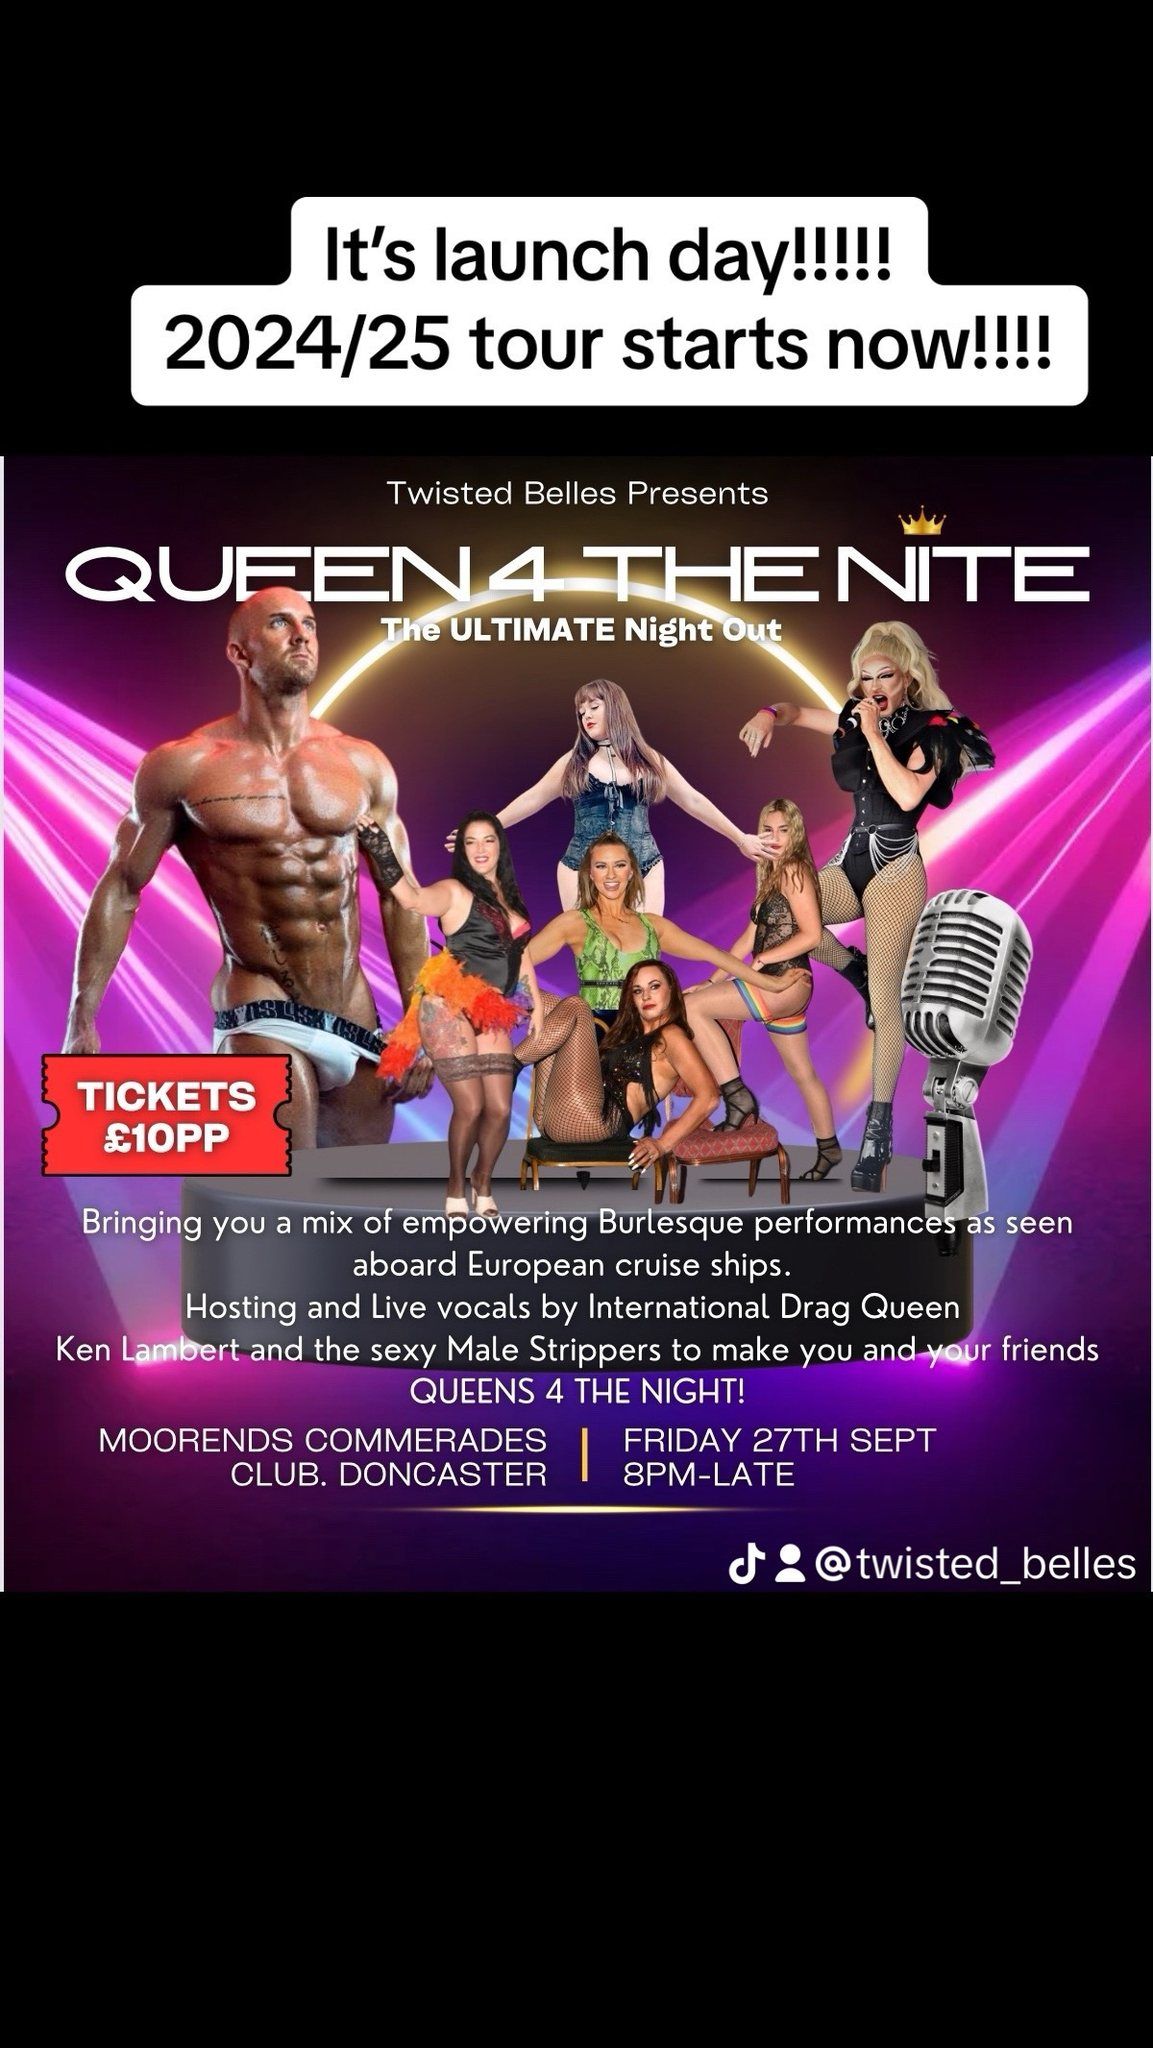 Queen 4 The Night \ud83d\udc51 BOXED-Leicester 